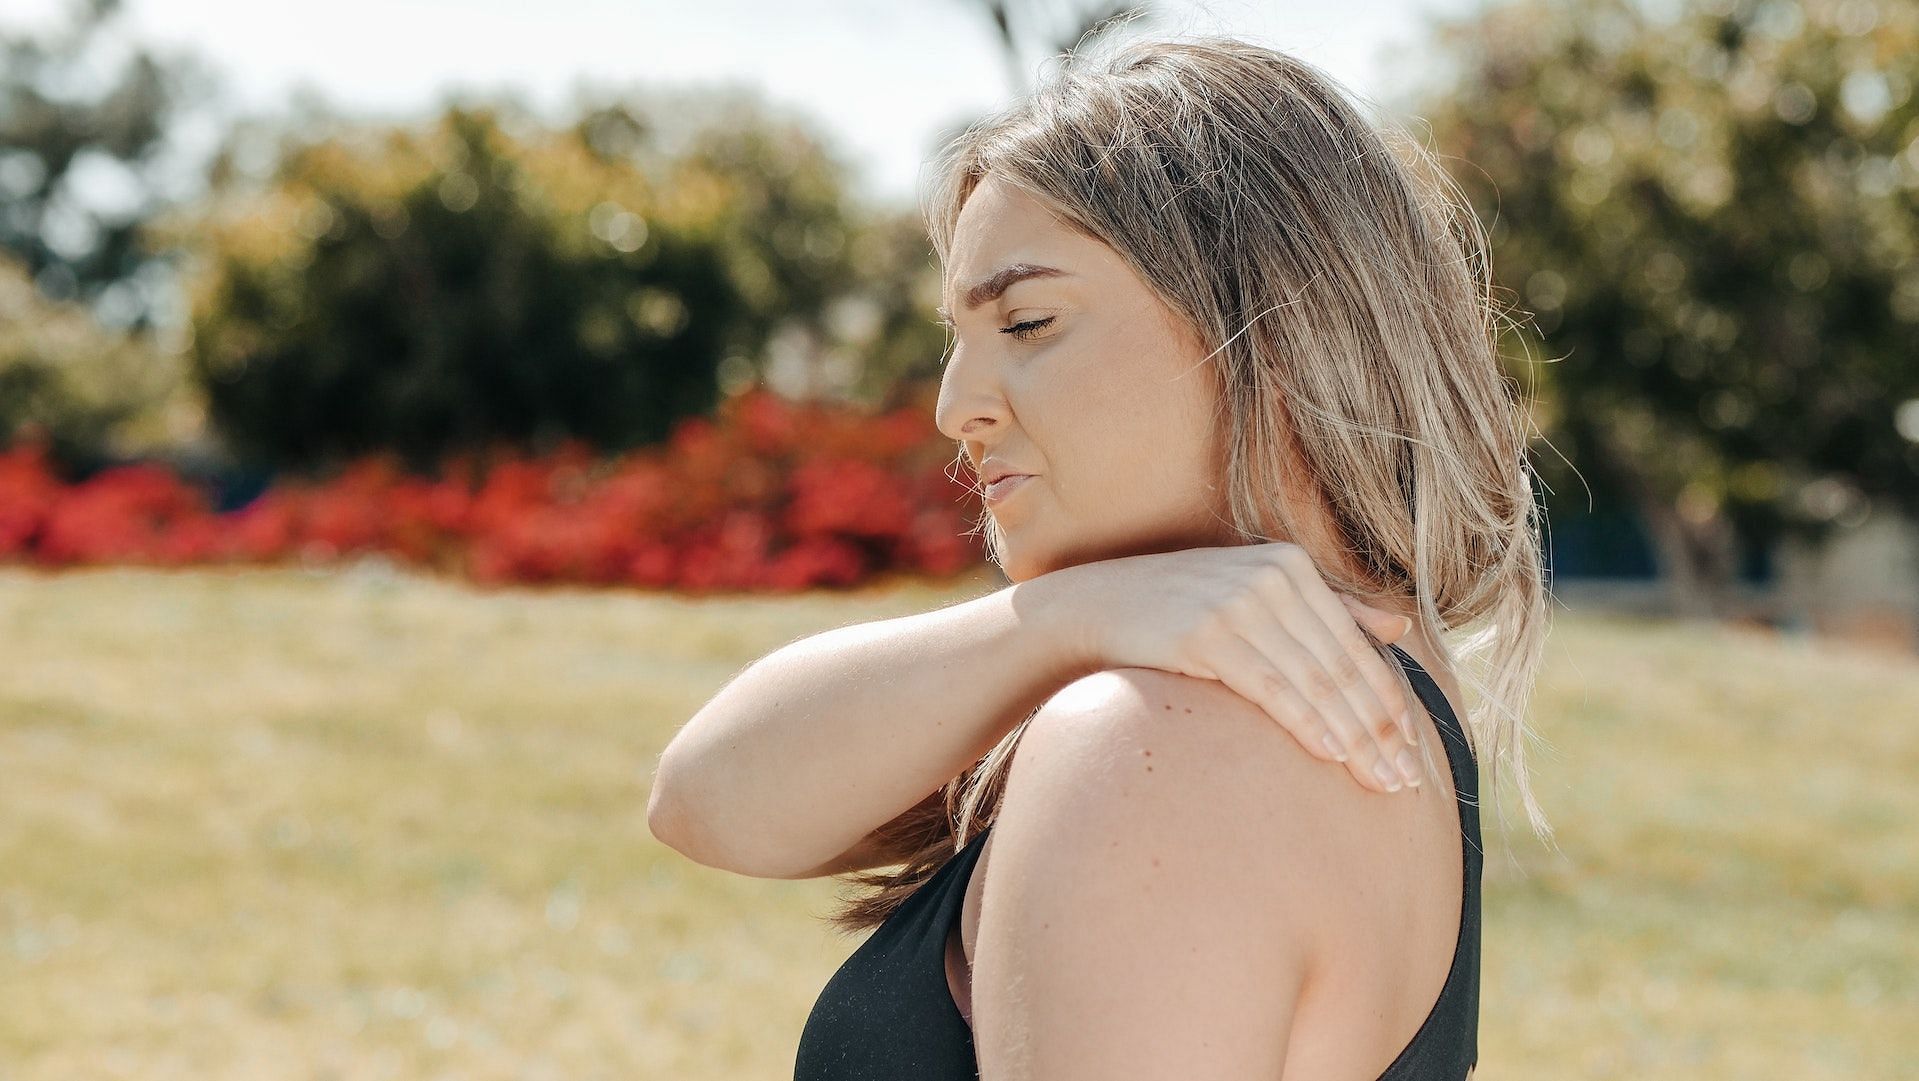 Symptoms of rotator cuff injuries include sharp pain over the front and lateral part of the shoulder and upper arm. (Photo via Pexels/Kindel Media)